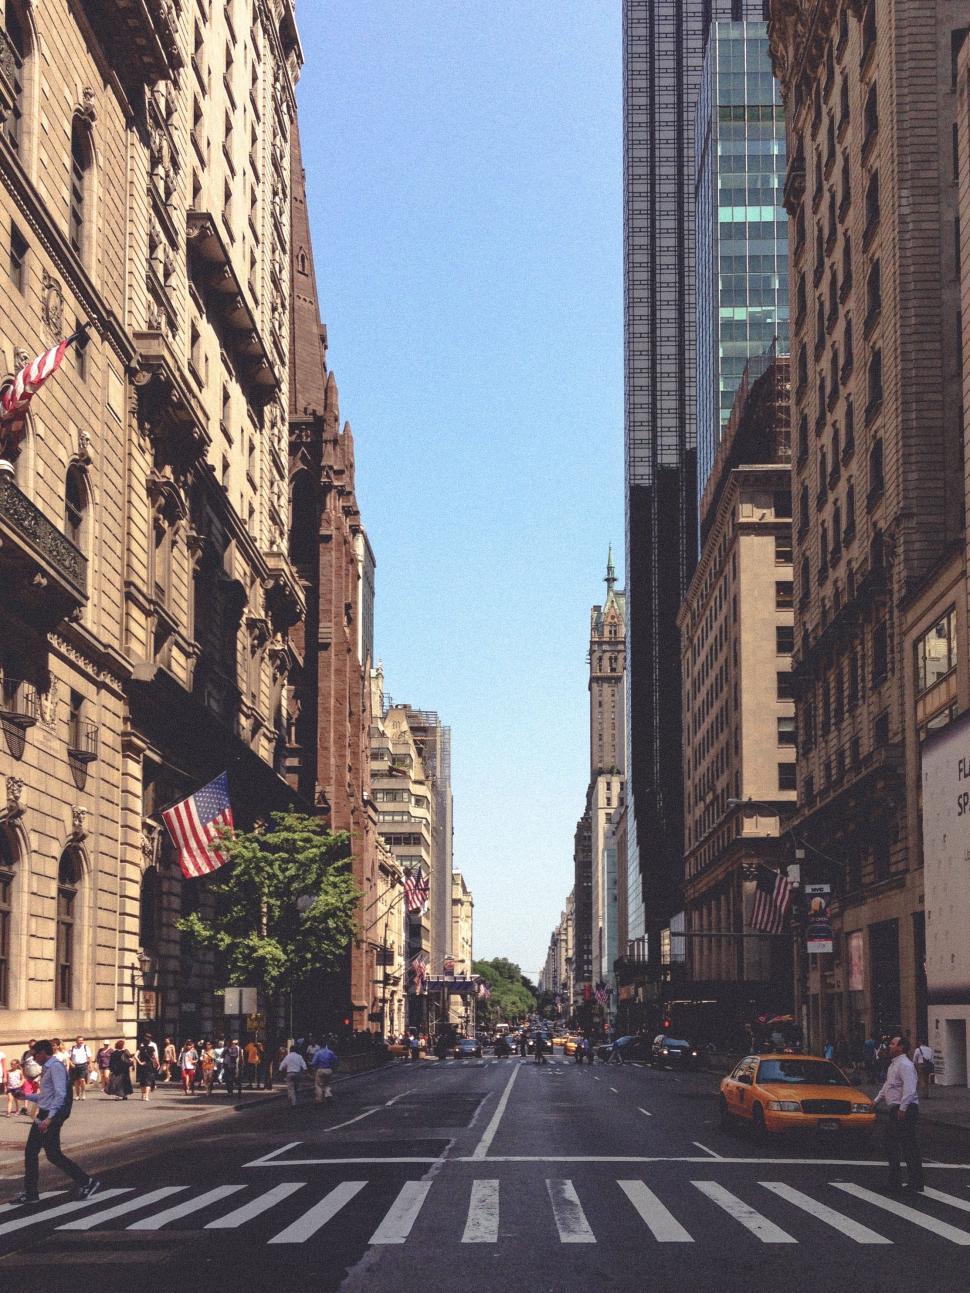 Free Image of Bustling City Street With Tall Buildings and Traffic 